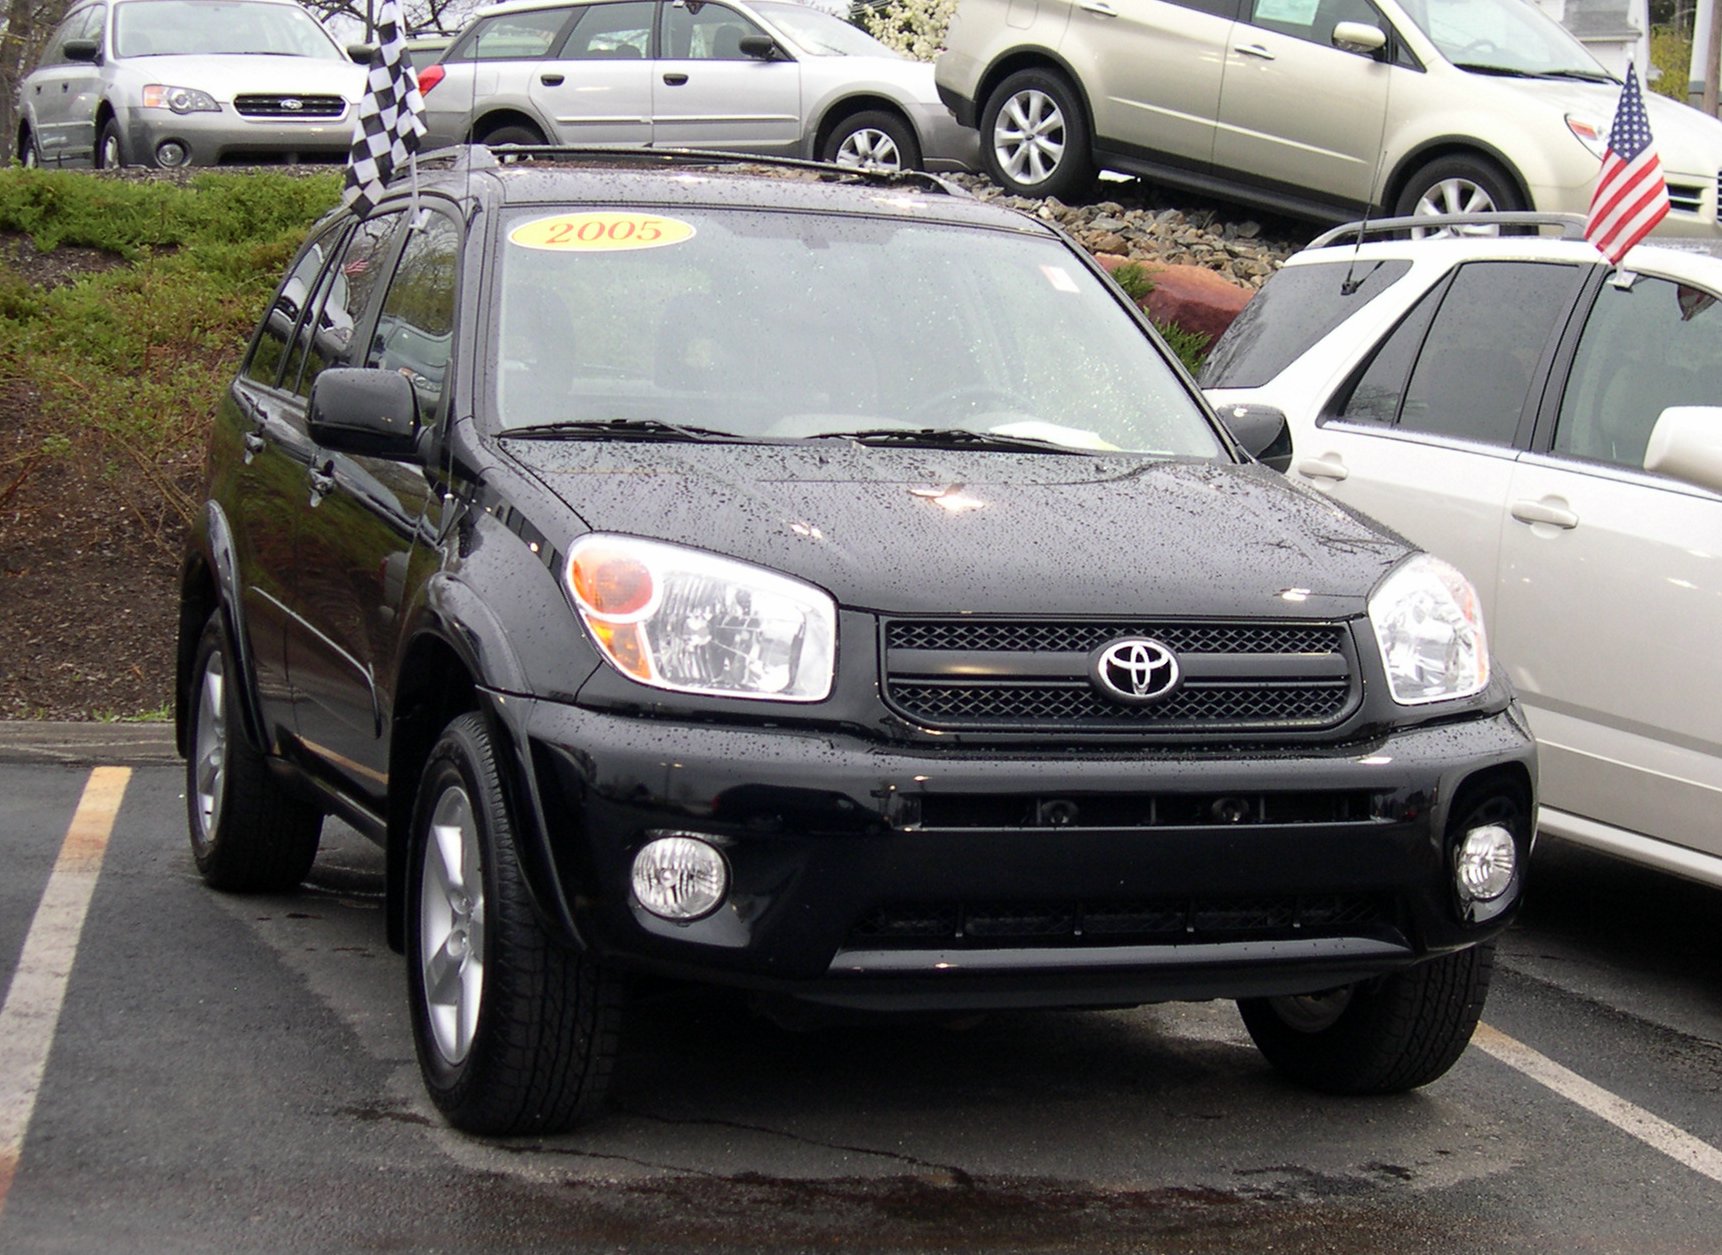 Toyota RAV4 2005: Review, Amazing Pictures and Images – Look at the car